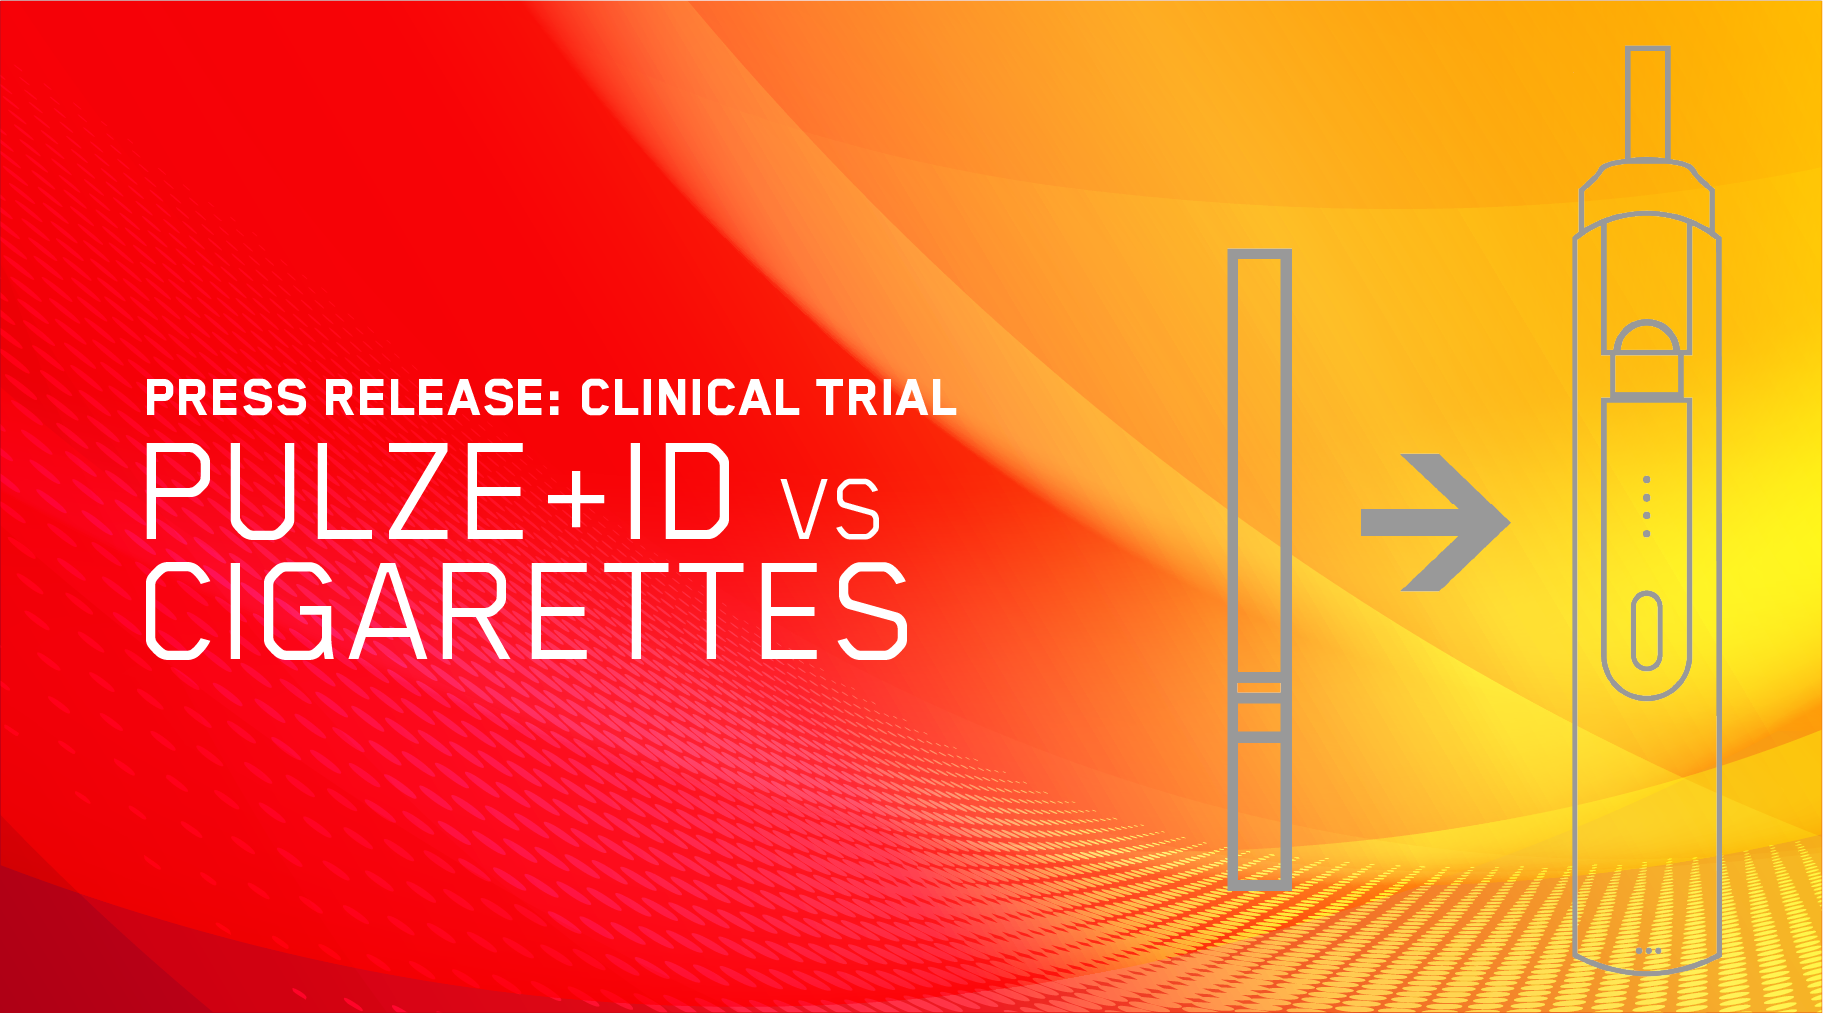 NEW CLINICAL RESEARCH: PULZE+ID DEMONSTRATE CREDENTIALS AS A VIABLE SMOKING ALTERNATIVE